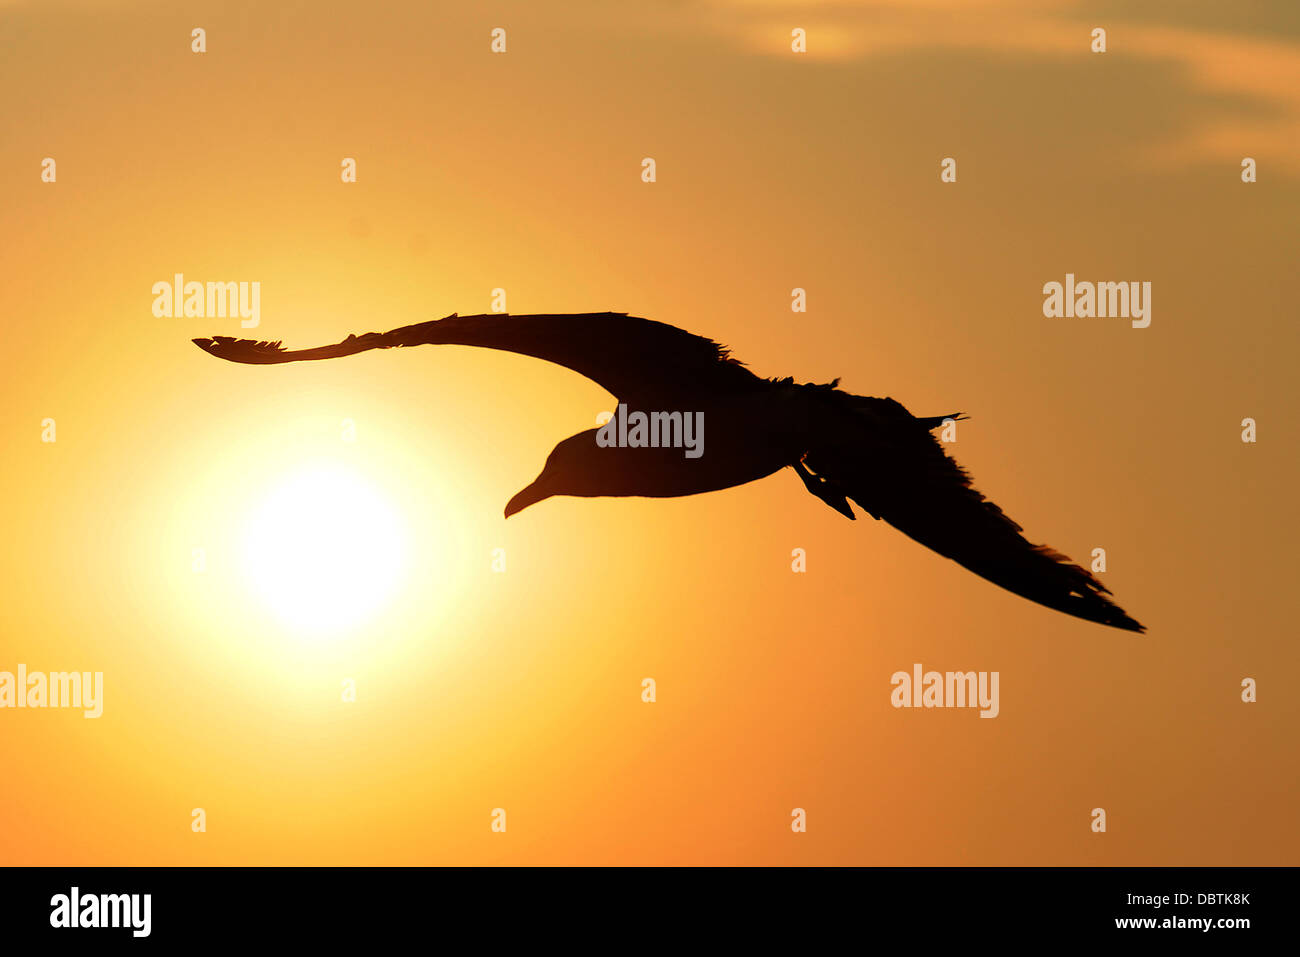 A silhouetted seagull flying at sunset. Stock Photo